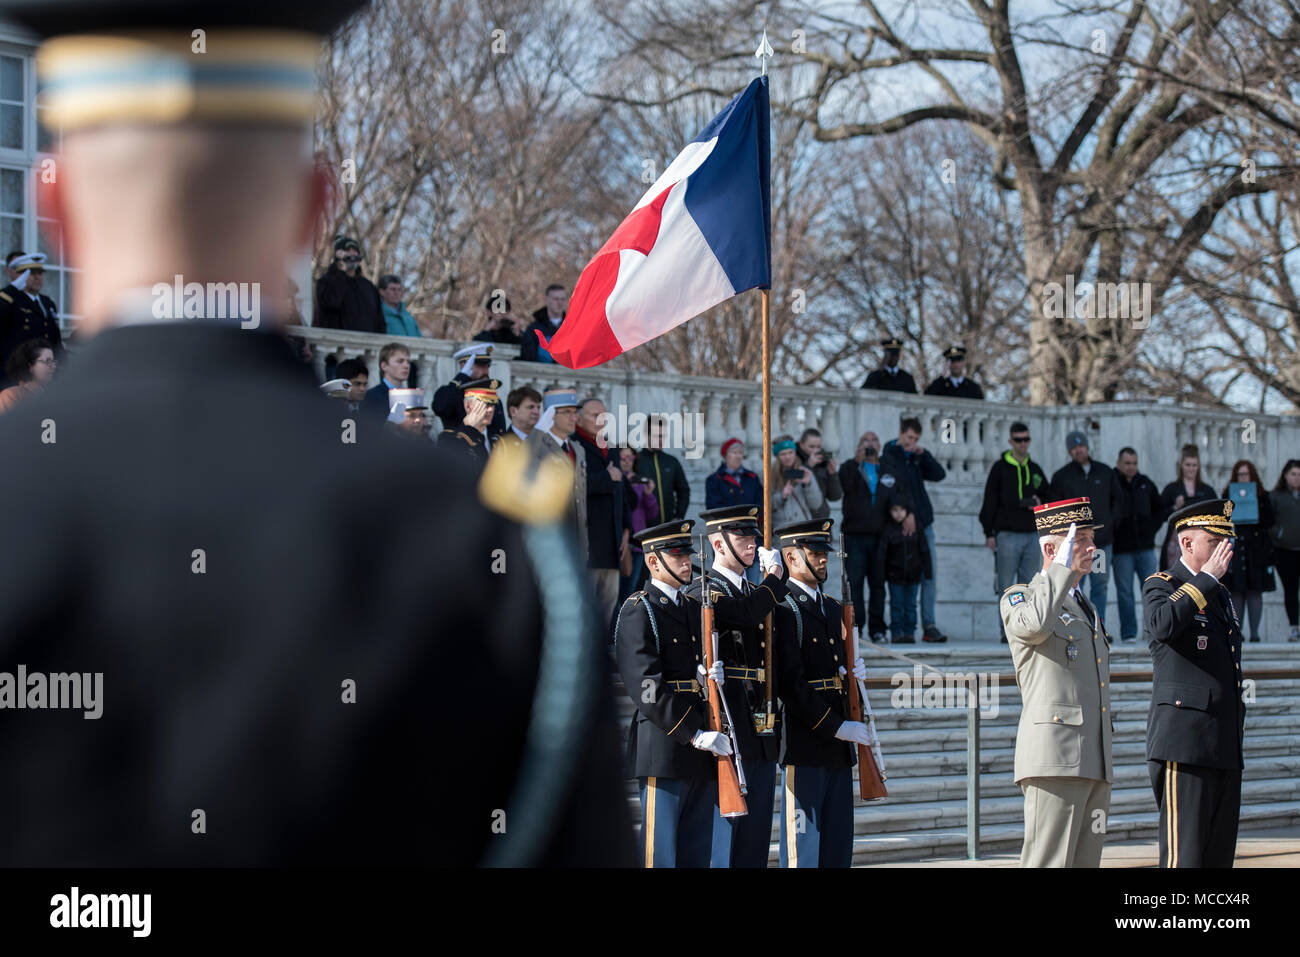 Gen. François Lecointre (second to right), chief of the defence staff, French Armed Forces; and Maj. Gen. John P. Sullivan (far right), assistant deputy chief of staff, G-4; render honors during an Armed Forces Full Honors Wreath-Laying Ceremony at the Tomb of the Unknown Soldier at Arlington National Cemetery, Arlington, Virginia, Feb. 12, 2018. Lecointre visited ANC as part of his first official visit, touring the Memorial Amphitheater Display Room and meeting with ANC Senior Leadership. (U.S. Army photo by Elizabeth Fraser / Arlington National Cemetery / released) Stock Photo